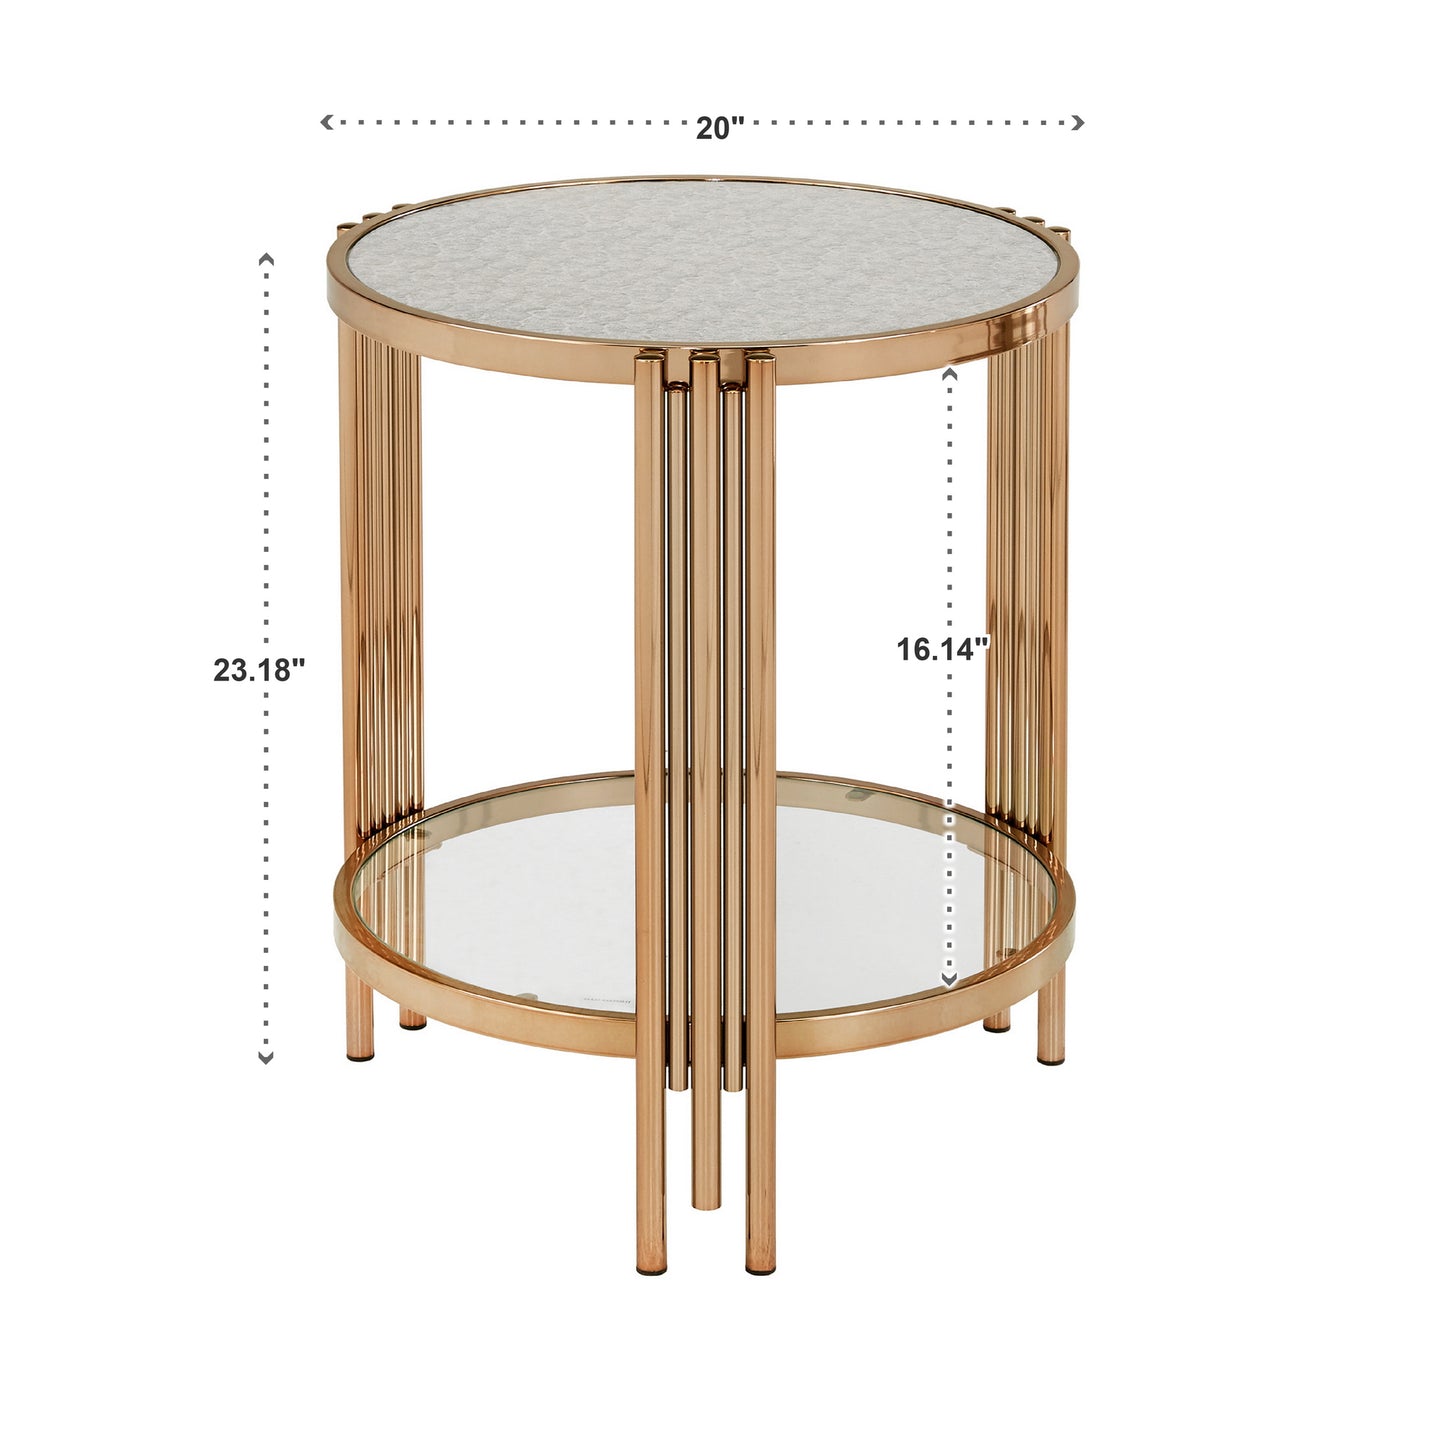 Champagne Gold Finish Textured Glass Table with Shelf - Nesting Coffee Table + End Table